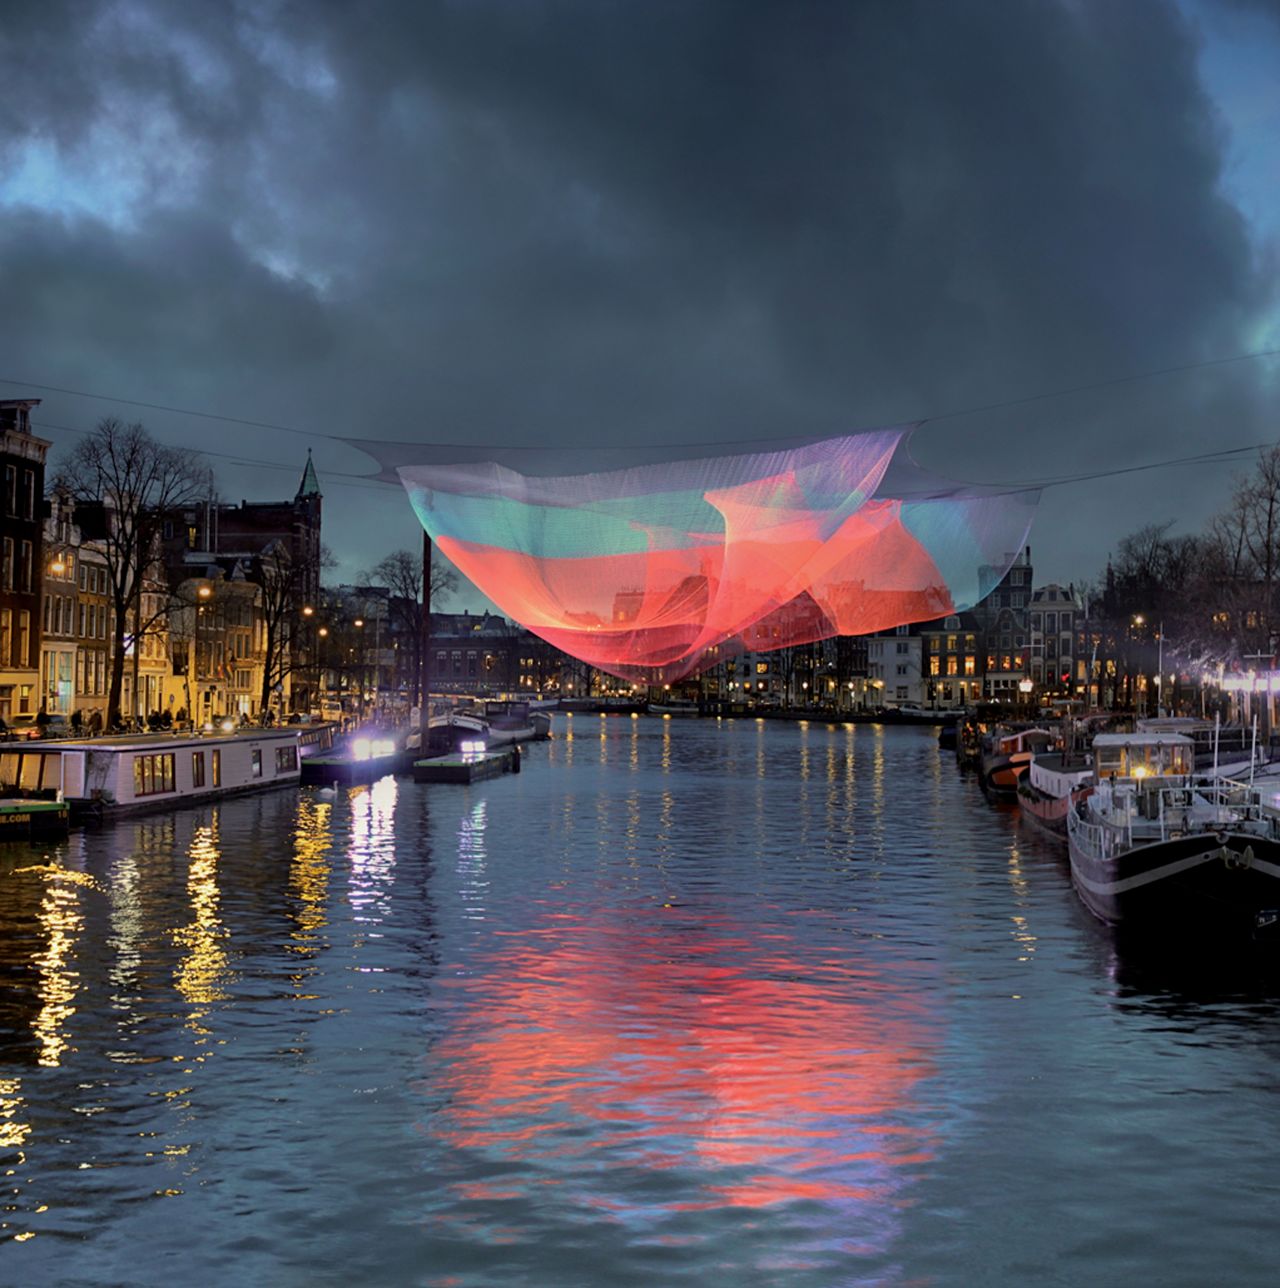 <em>Amsterdam. Janet Echelman, 2012-13</em><br /><br />This American artist is known for her monumental art installations: intricately-woven net sculptures that light up the sky with their billowing, colorful forms. Responding to wind, water and light, these mesmerizing works transform public spaces into contemplative oases. Exploring the potential of unusual materials, from fishing nets to atomized water particles, she combines craft with high-tech media to create works that are precisely engineered, yet charmingly ethereal.